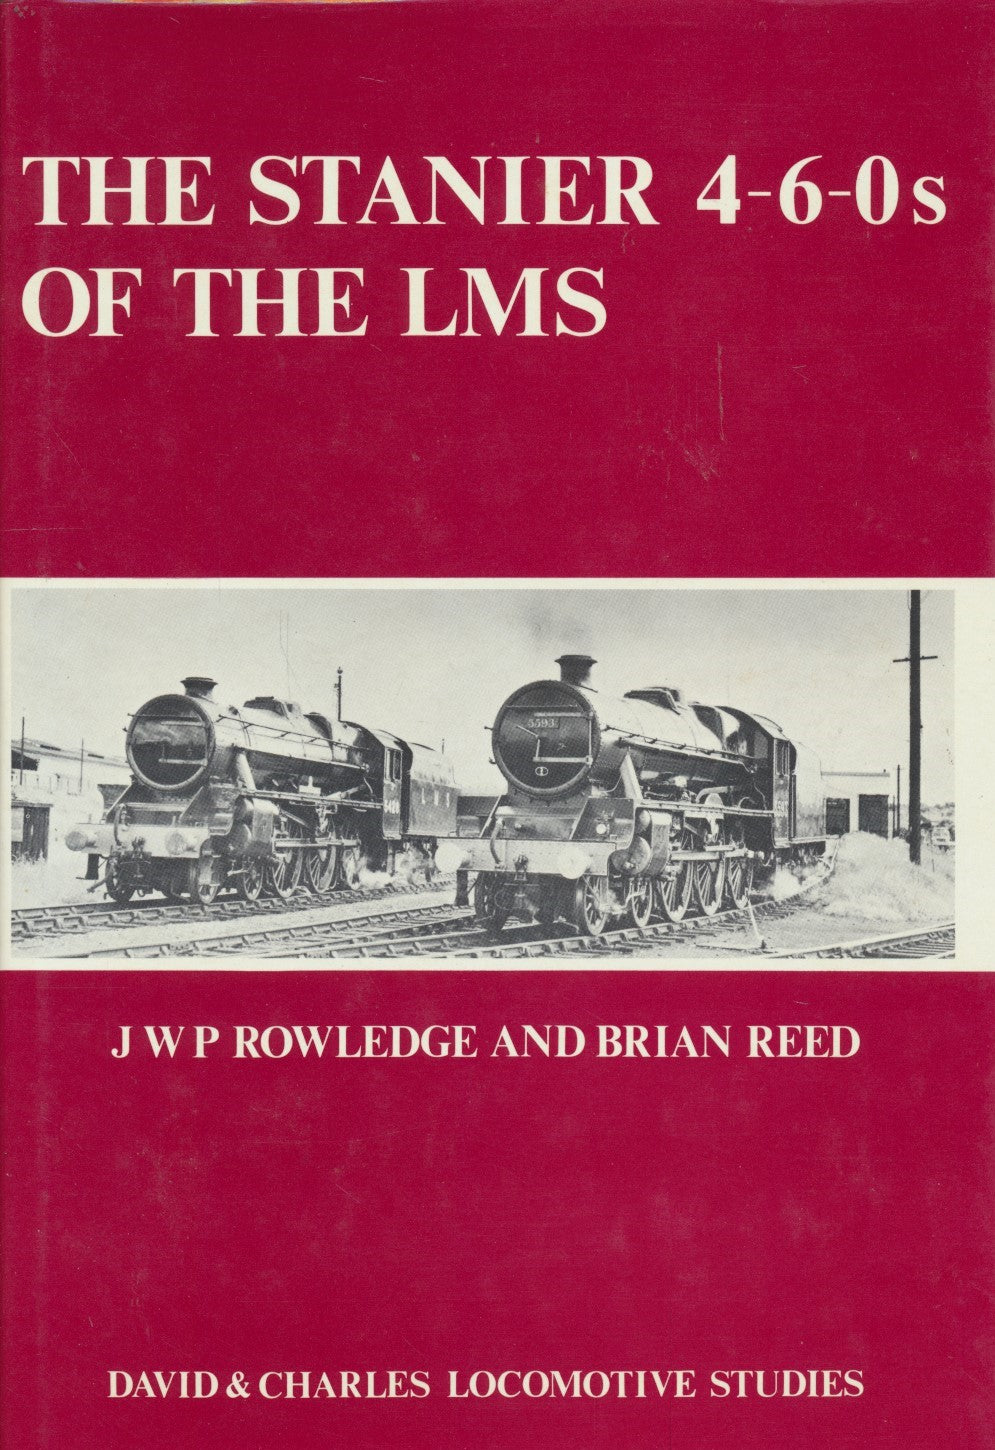 The Stanier 4-6-0s of the LMS